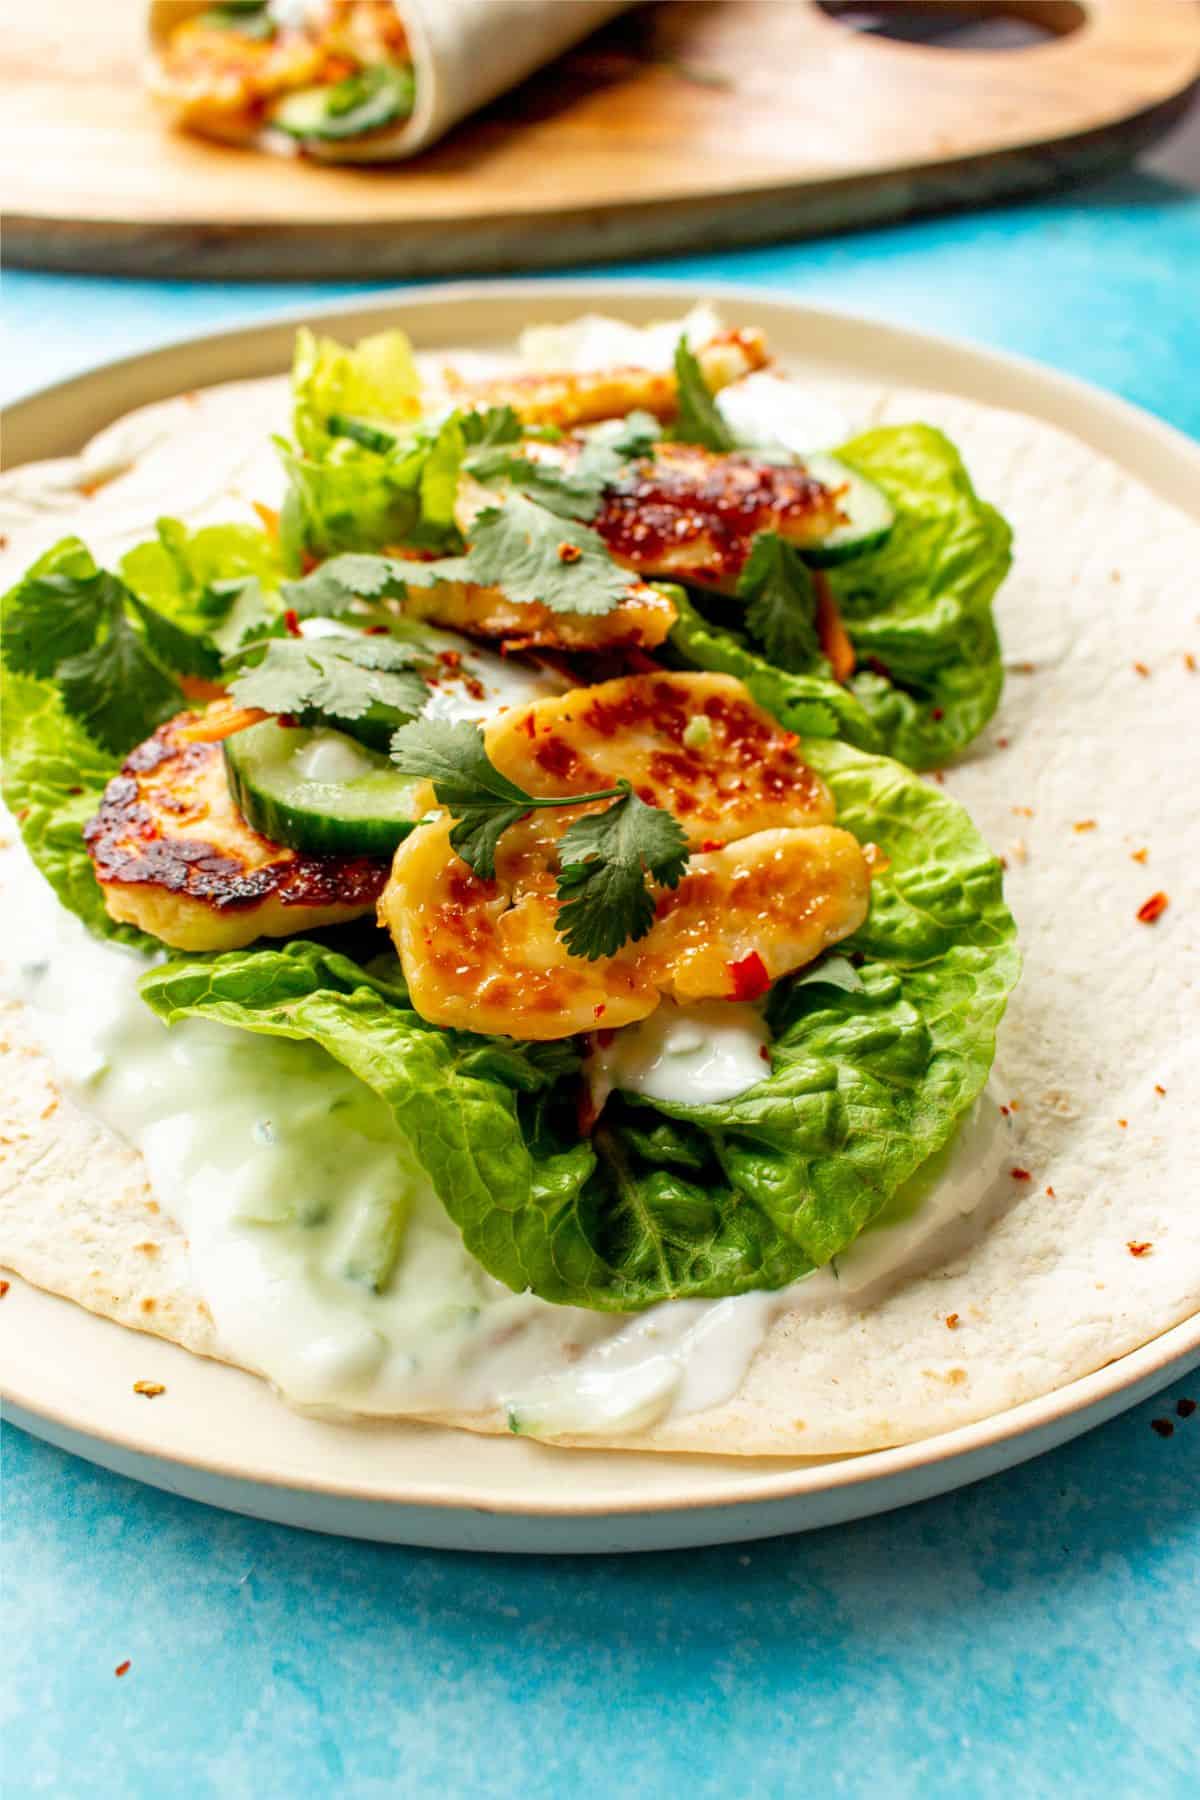 Close up of a halloumi wrap on a plate with lettuce, carrot, halloumi and topped with the sweet chilli and Greek yogurt.